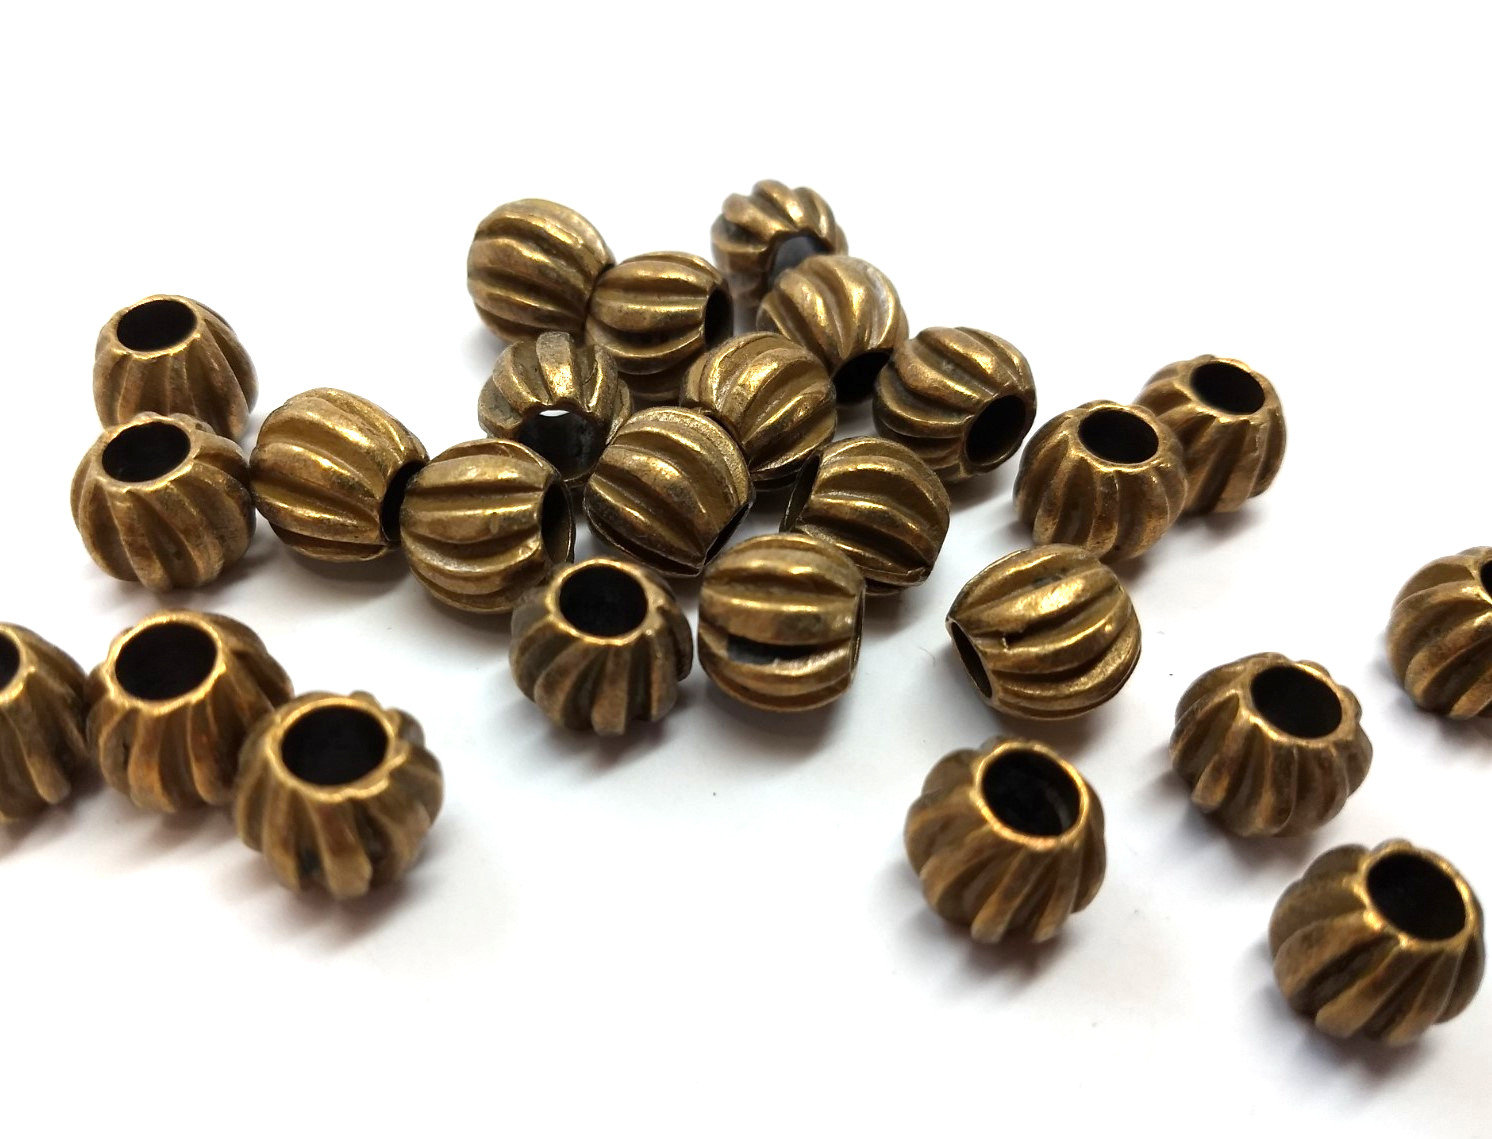 BD720 - 25 pcs Antique Brass Corrugated Striped METAL Ball Spacer Beads ...